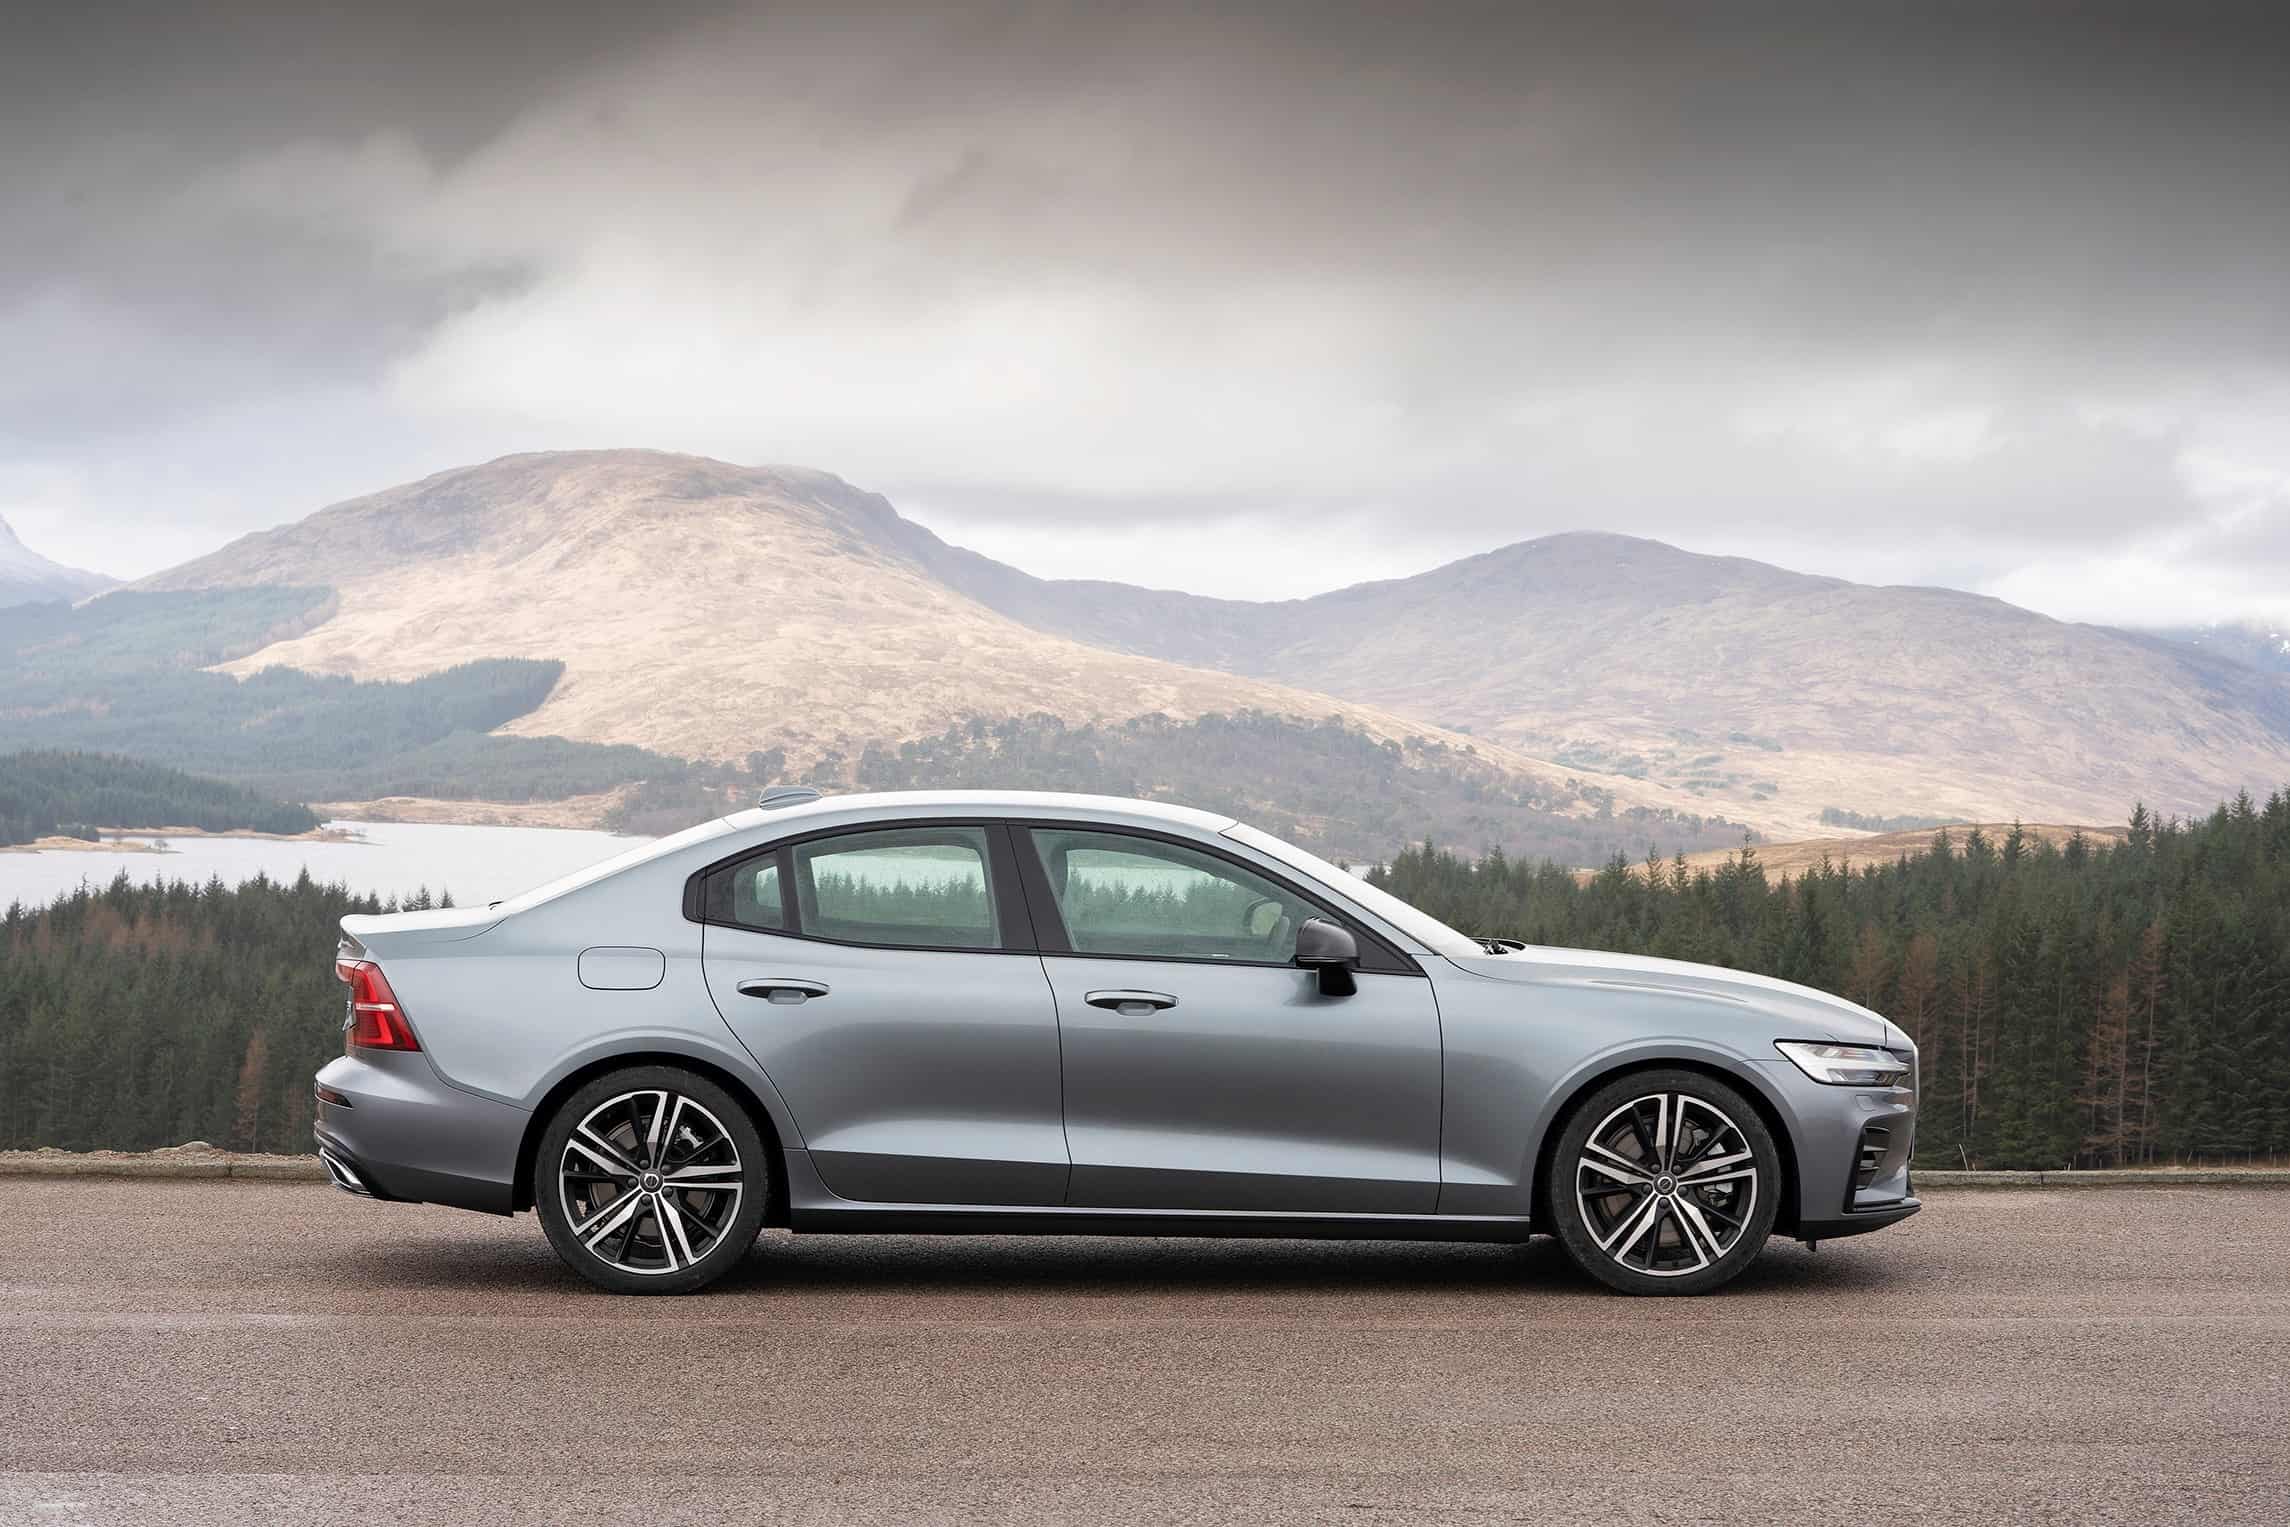 New VOLVO S60 T5 R-Design - It's Time To Control The Road. | Motoring ...